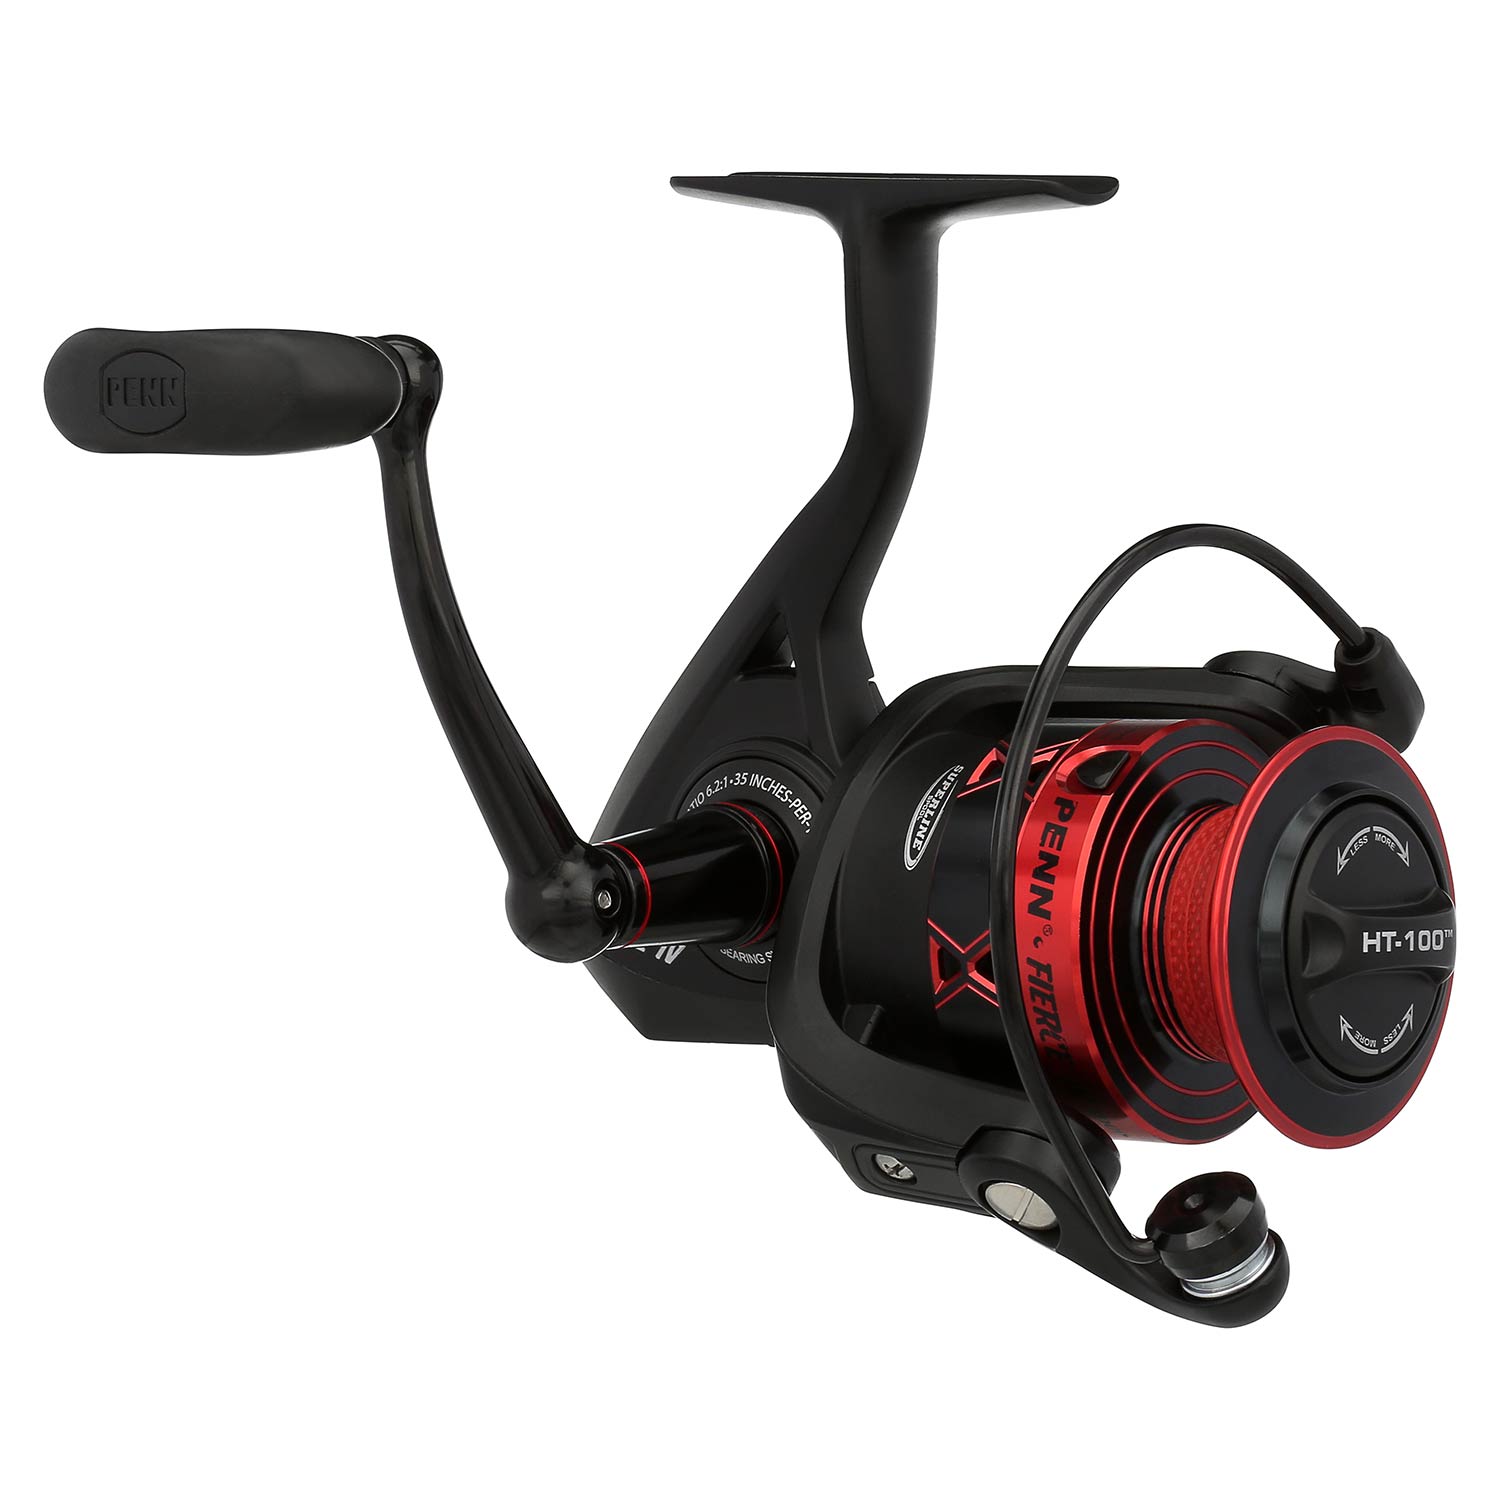 Spinning Reel Comet LED 40, 0.30mm-185m, 5.5:1 @ Balticboatnet Ship Spare  Parts, Boat- and Fishing Equipment